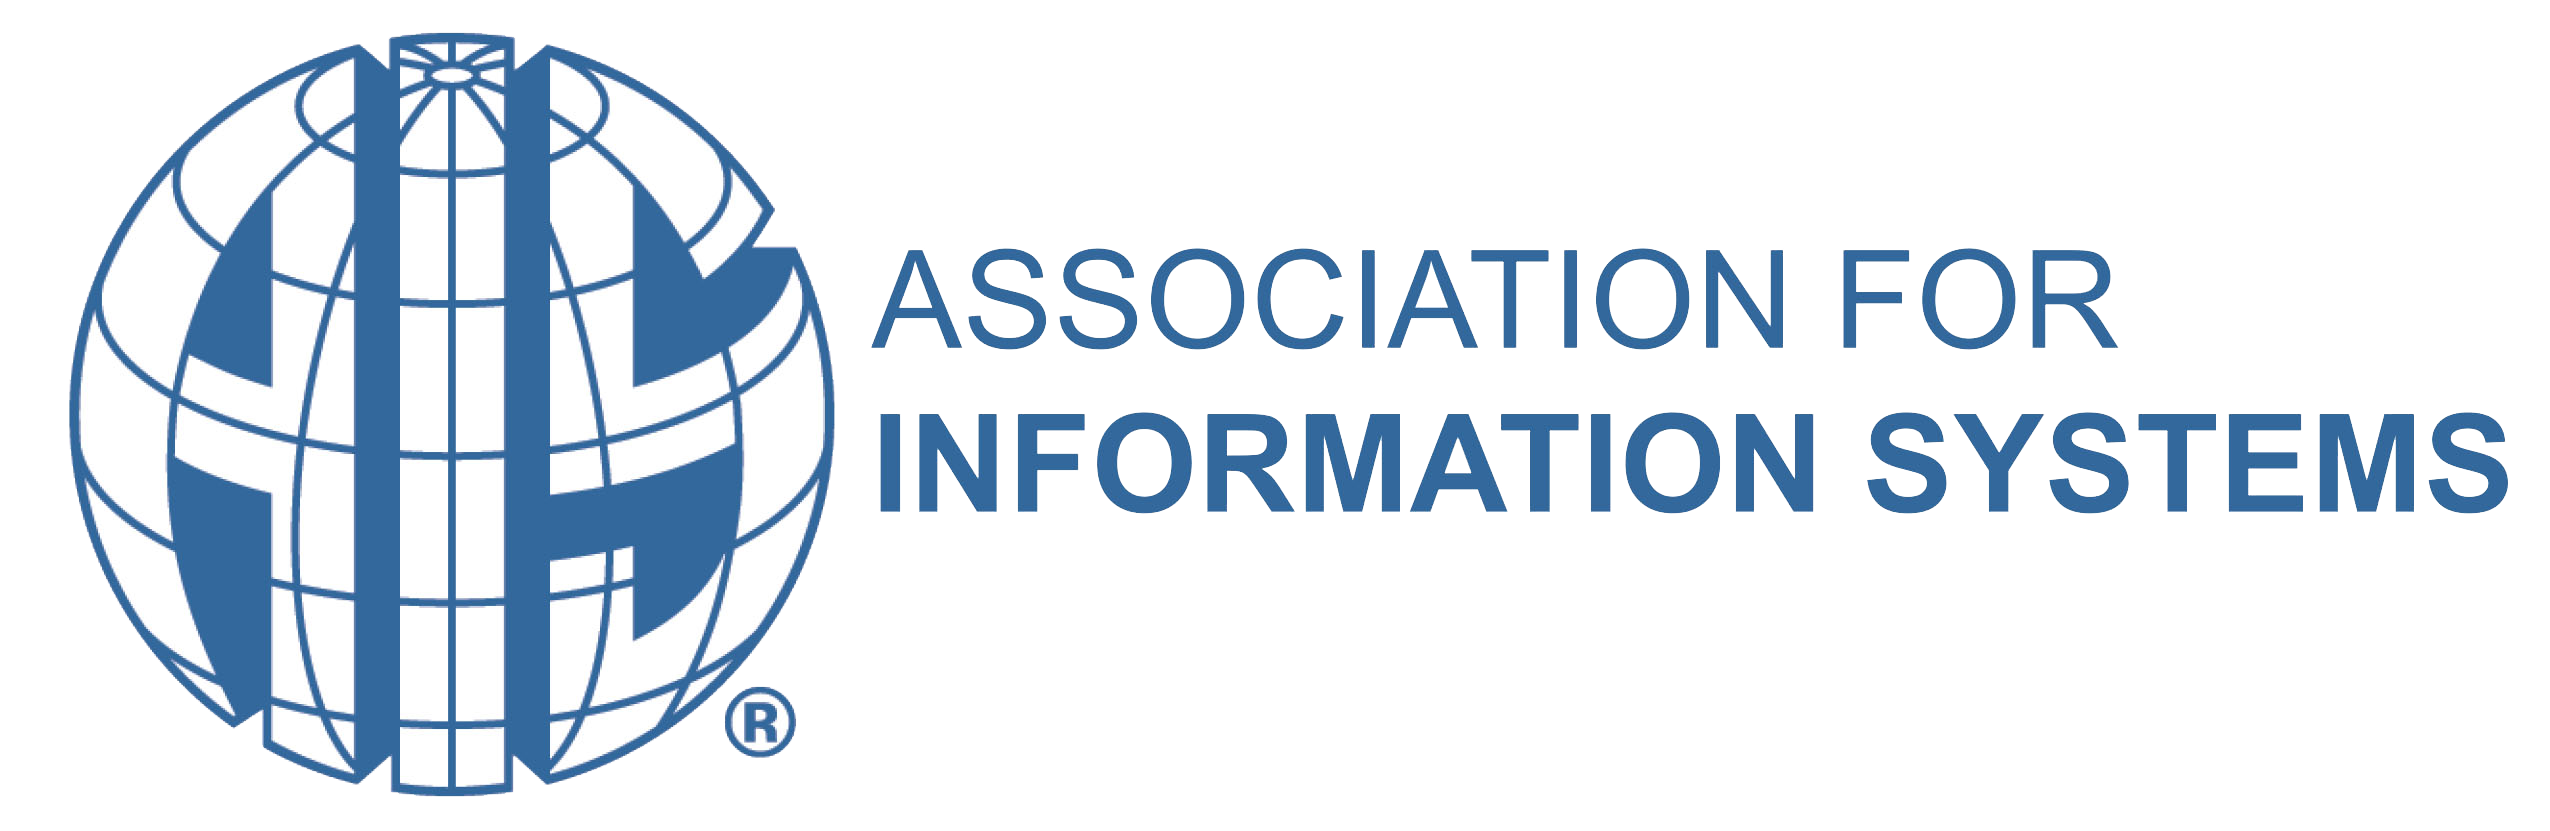 Association for Information Systems